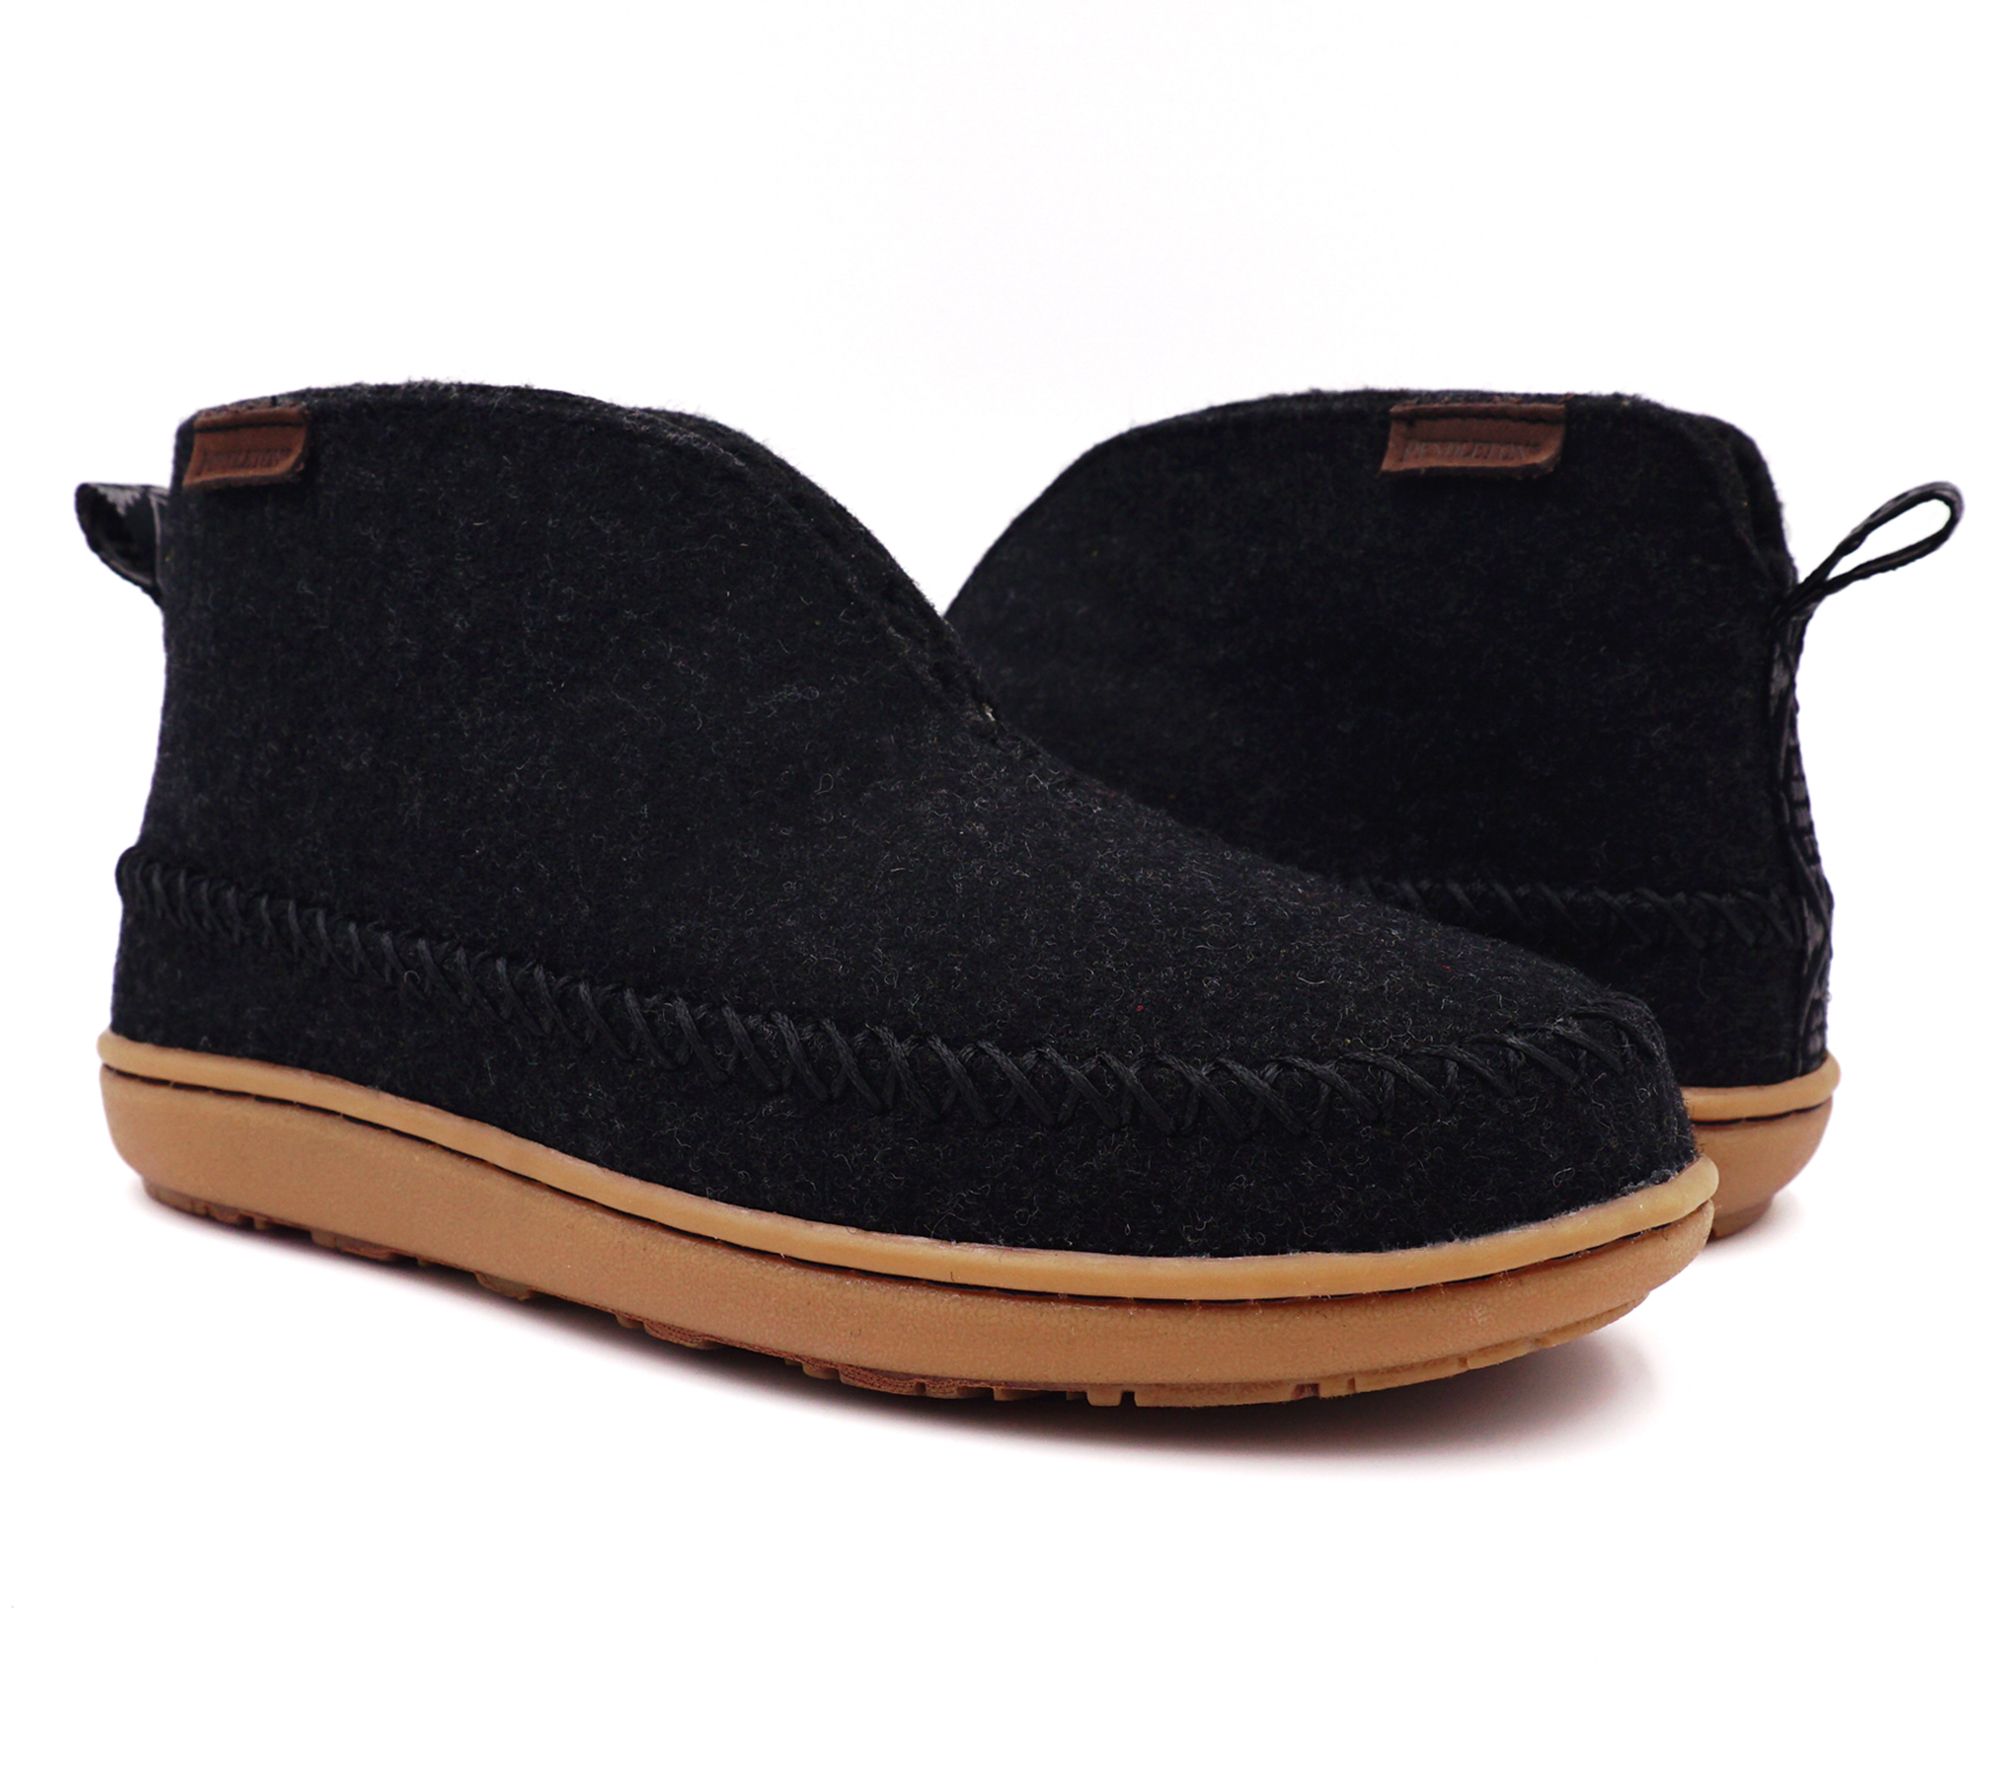 washable wool slippers